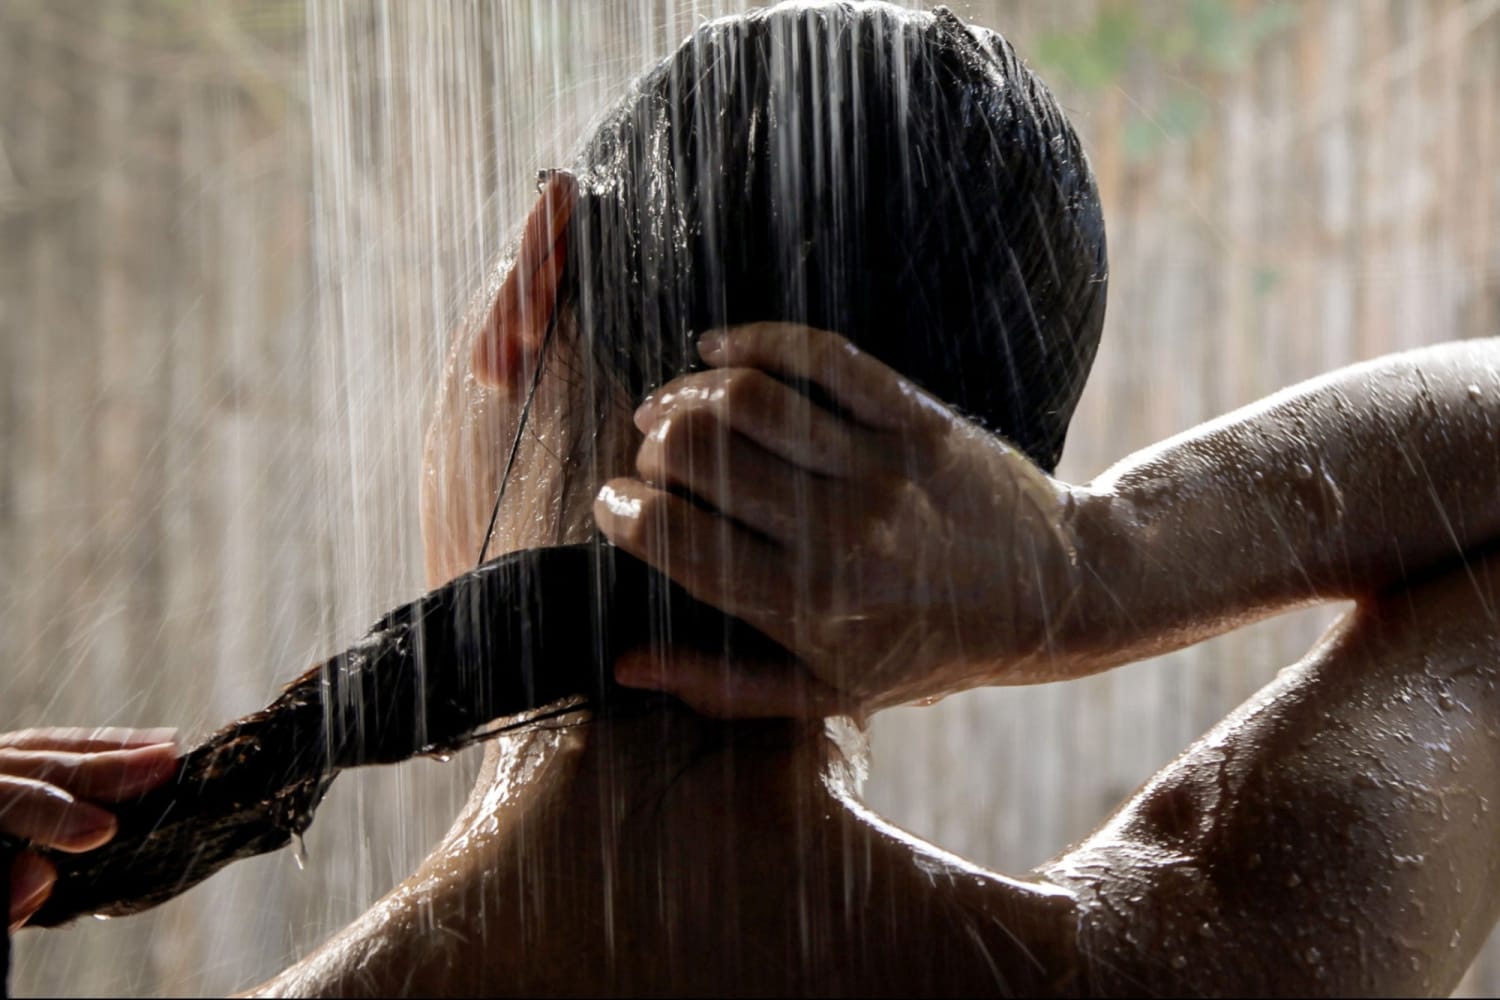 How to Transform Your Daily Shower Into a Mindful Experience